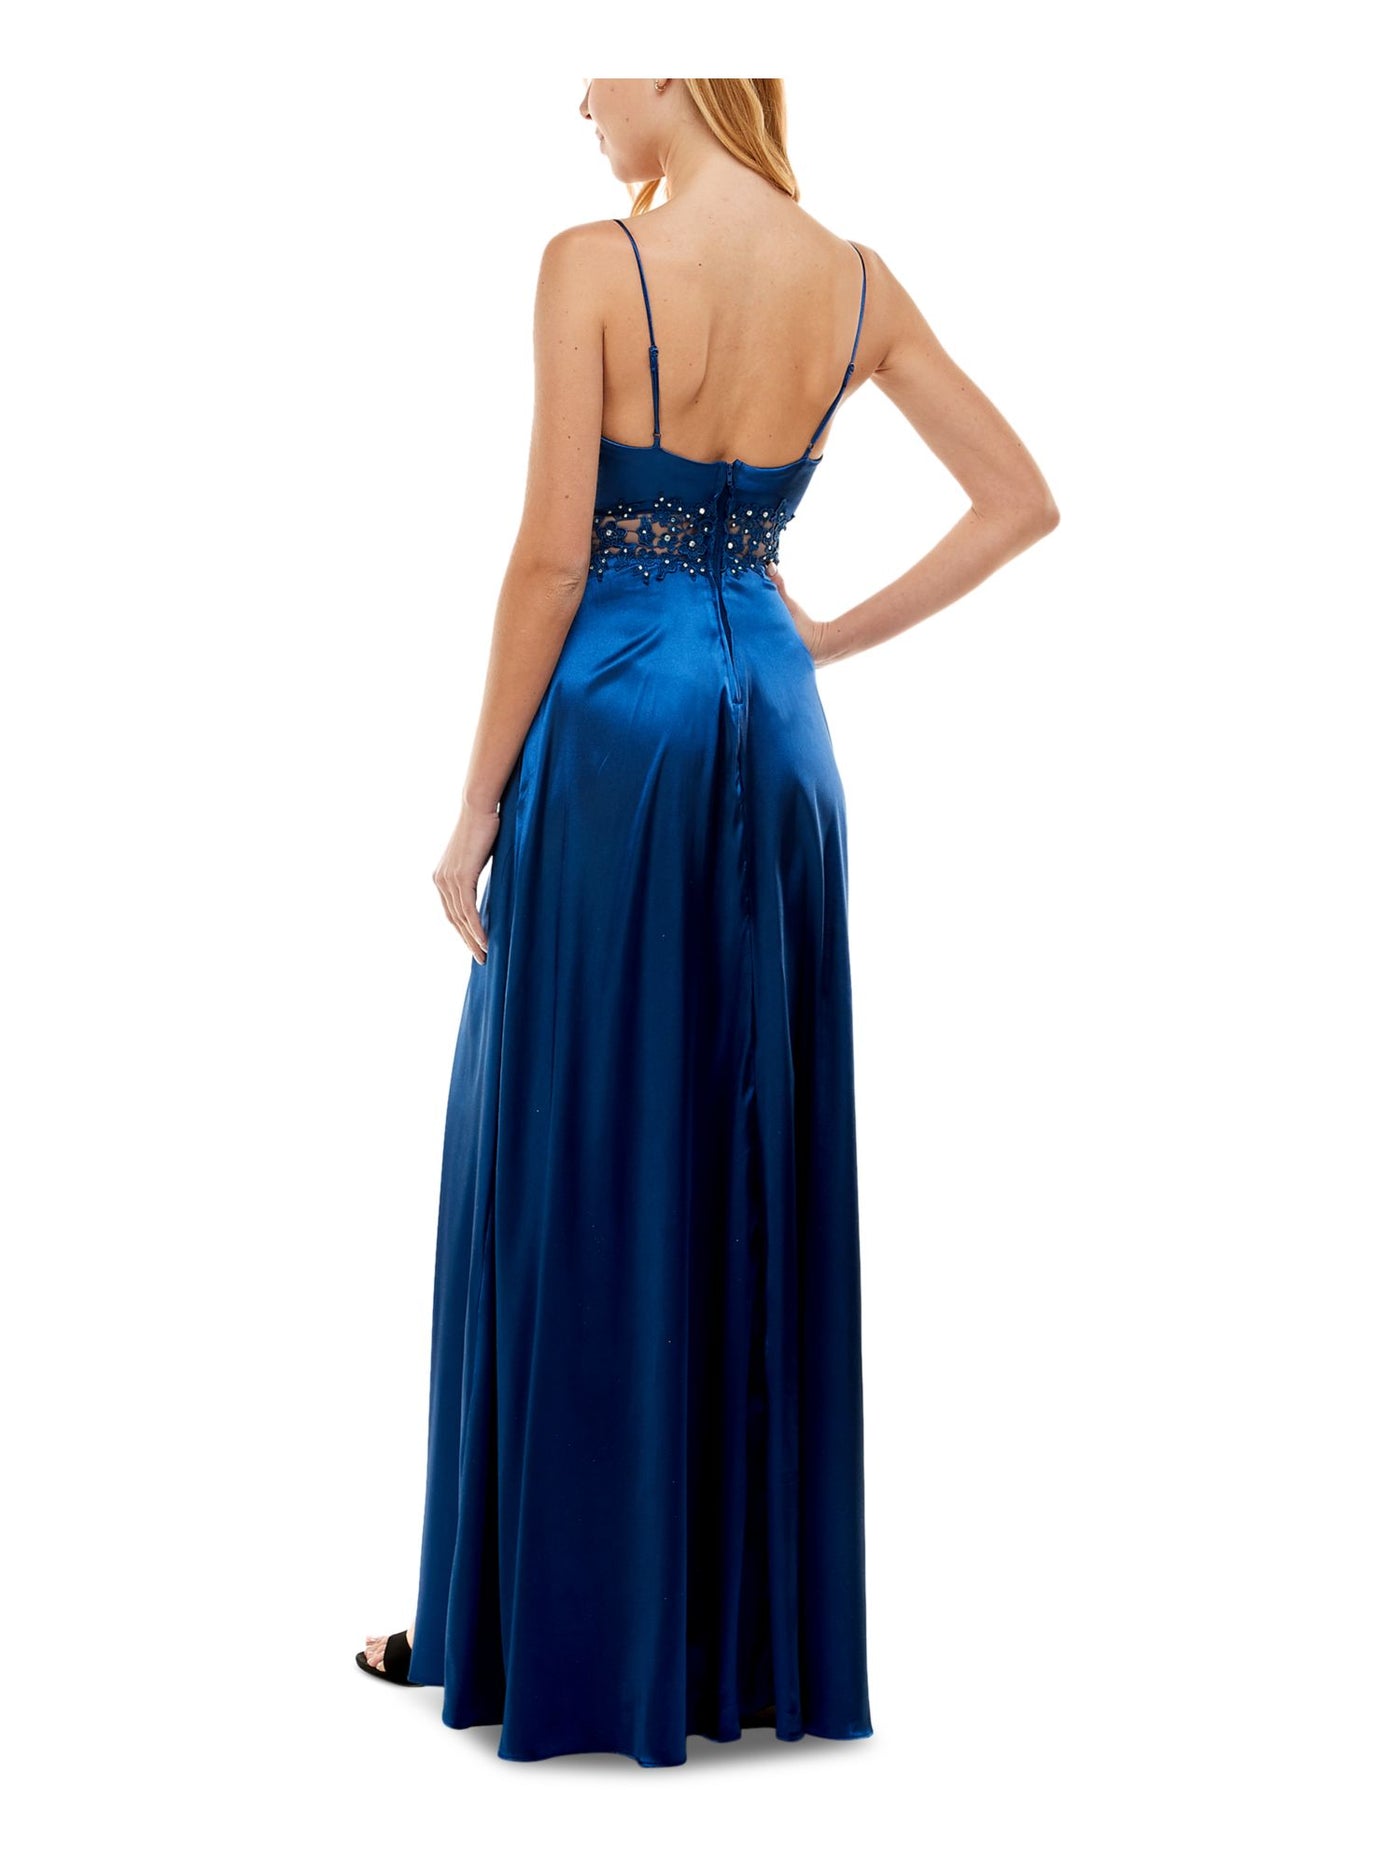 CITY STUDIO Womens Embellished Zippered Satin Gown Spaghetti Strap Scoop Neck Maxi Prom Dress